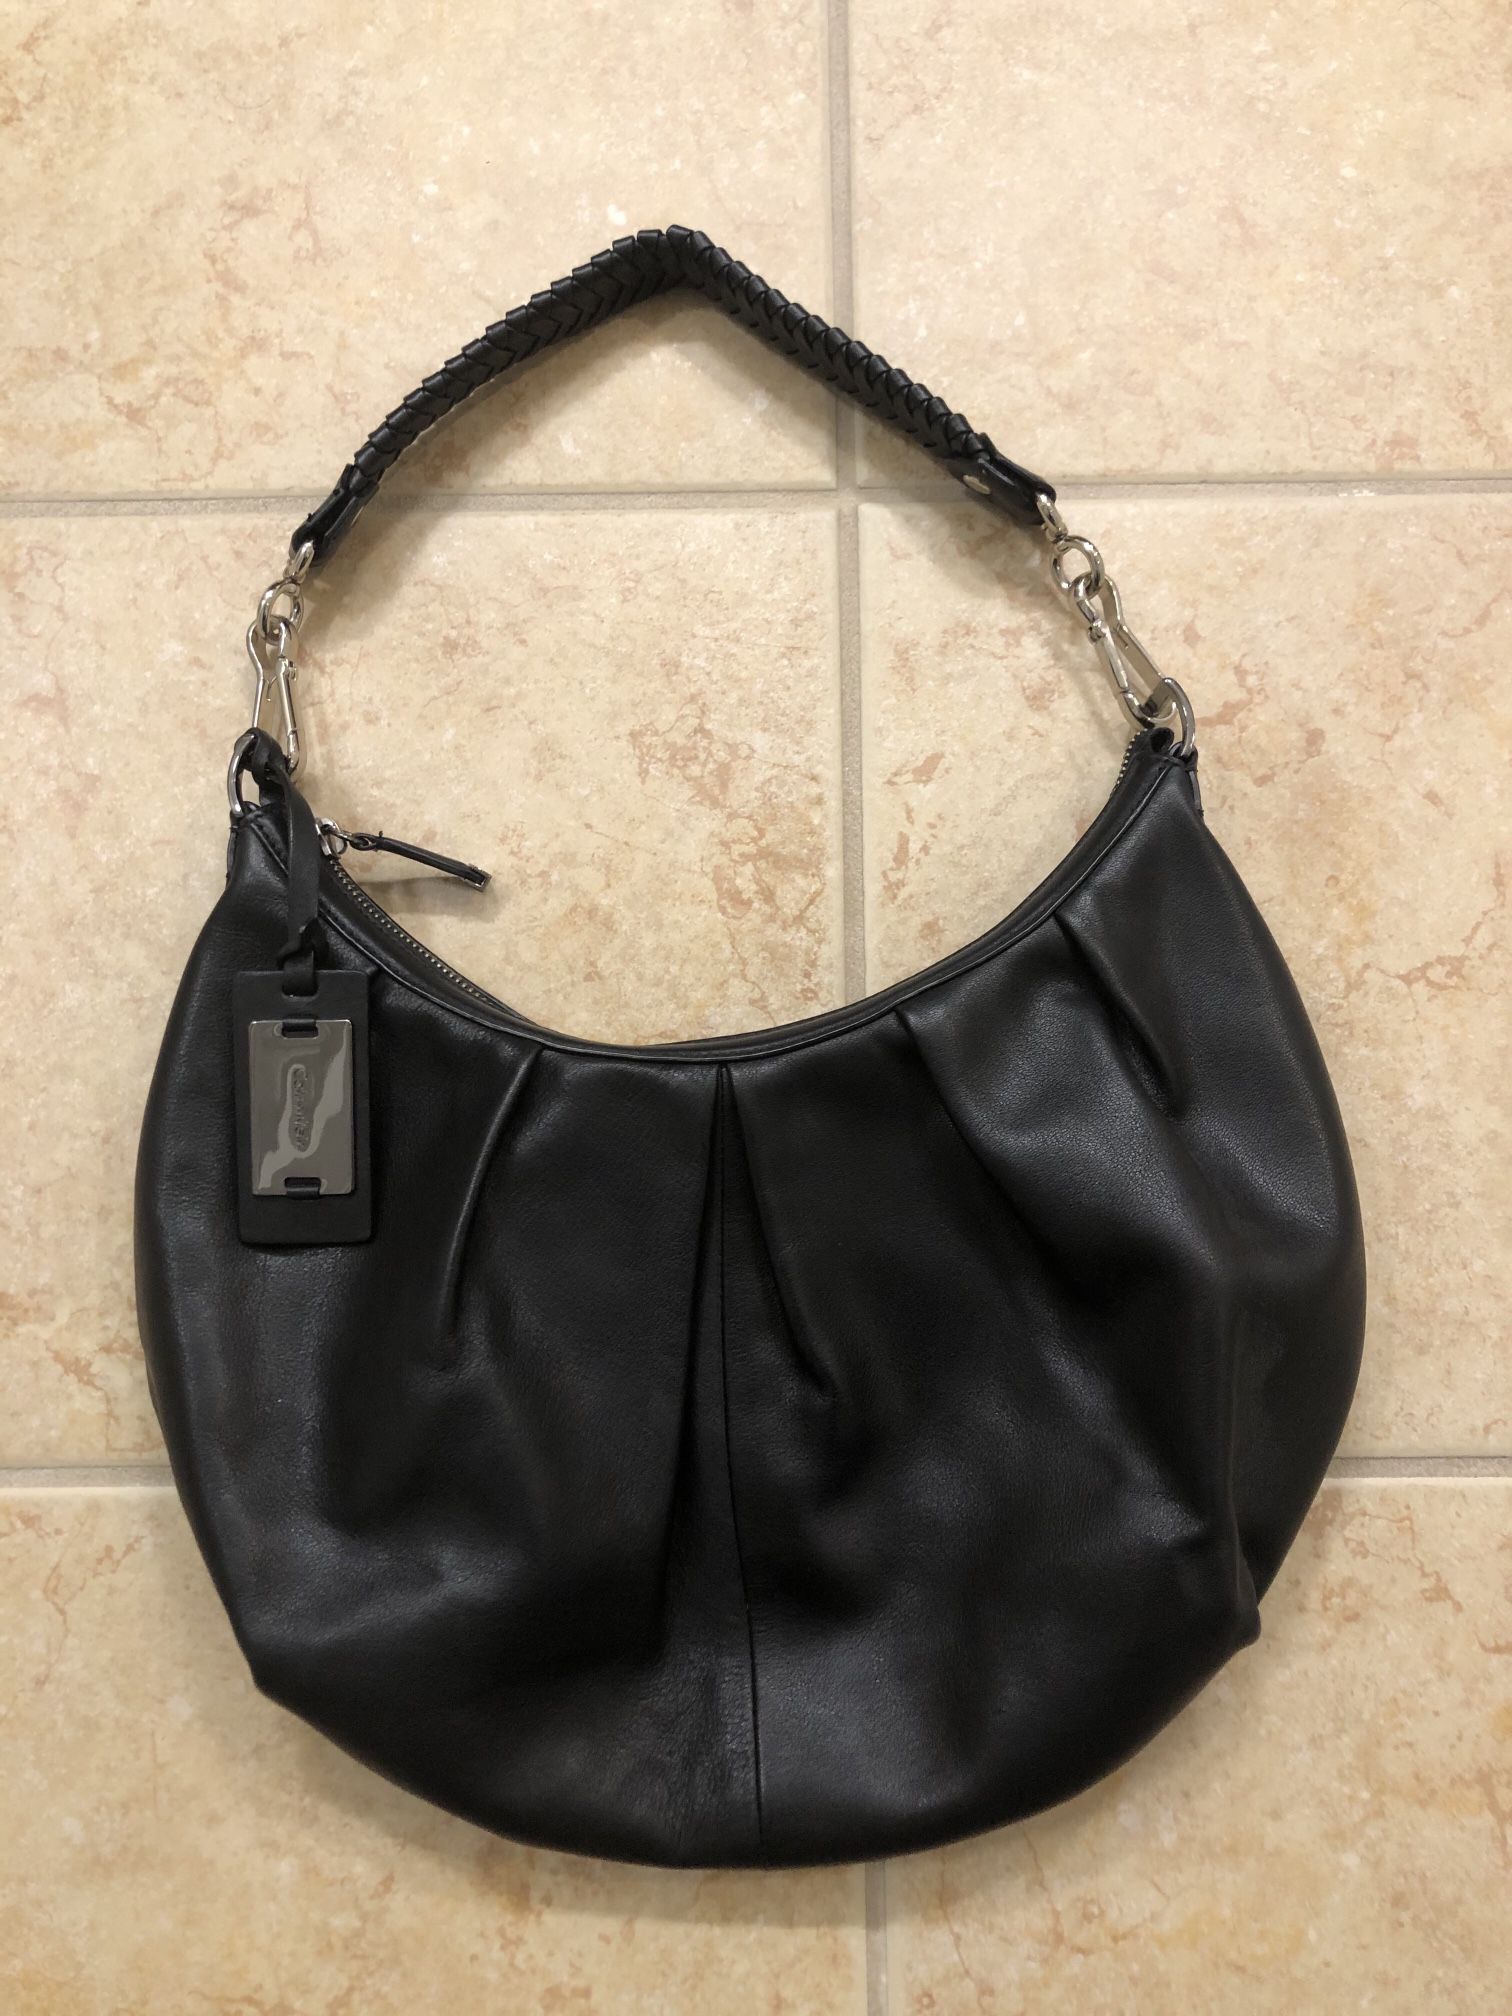 Calvin Klein slouchy hobo handbag purse bag with zipper, handle is a replacement shorter braided handle, roomy inside, $10 firm price cash at pickup i